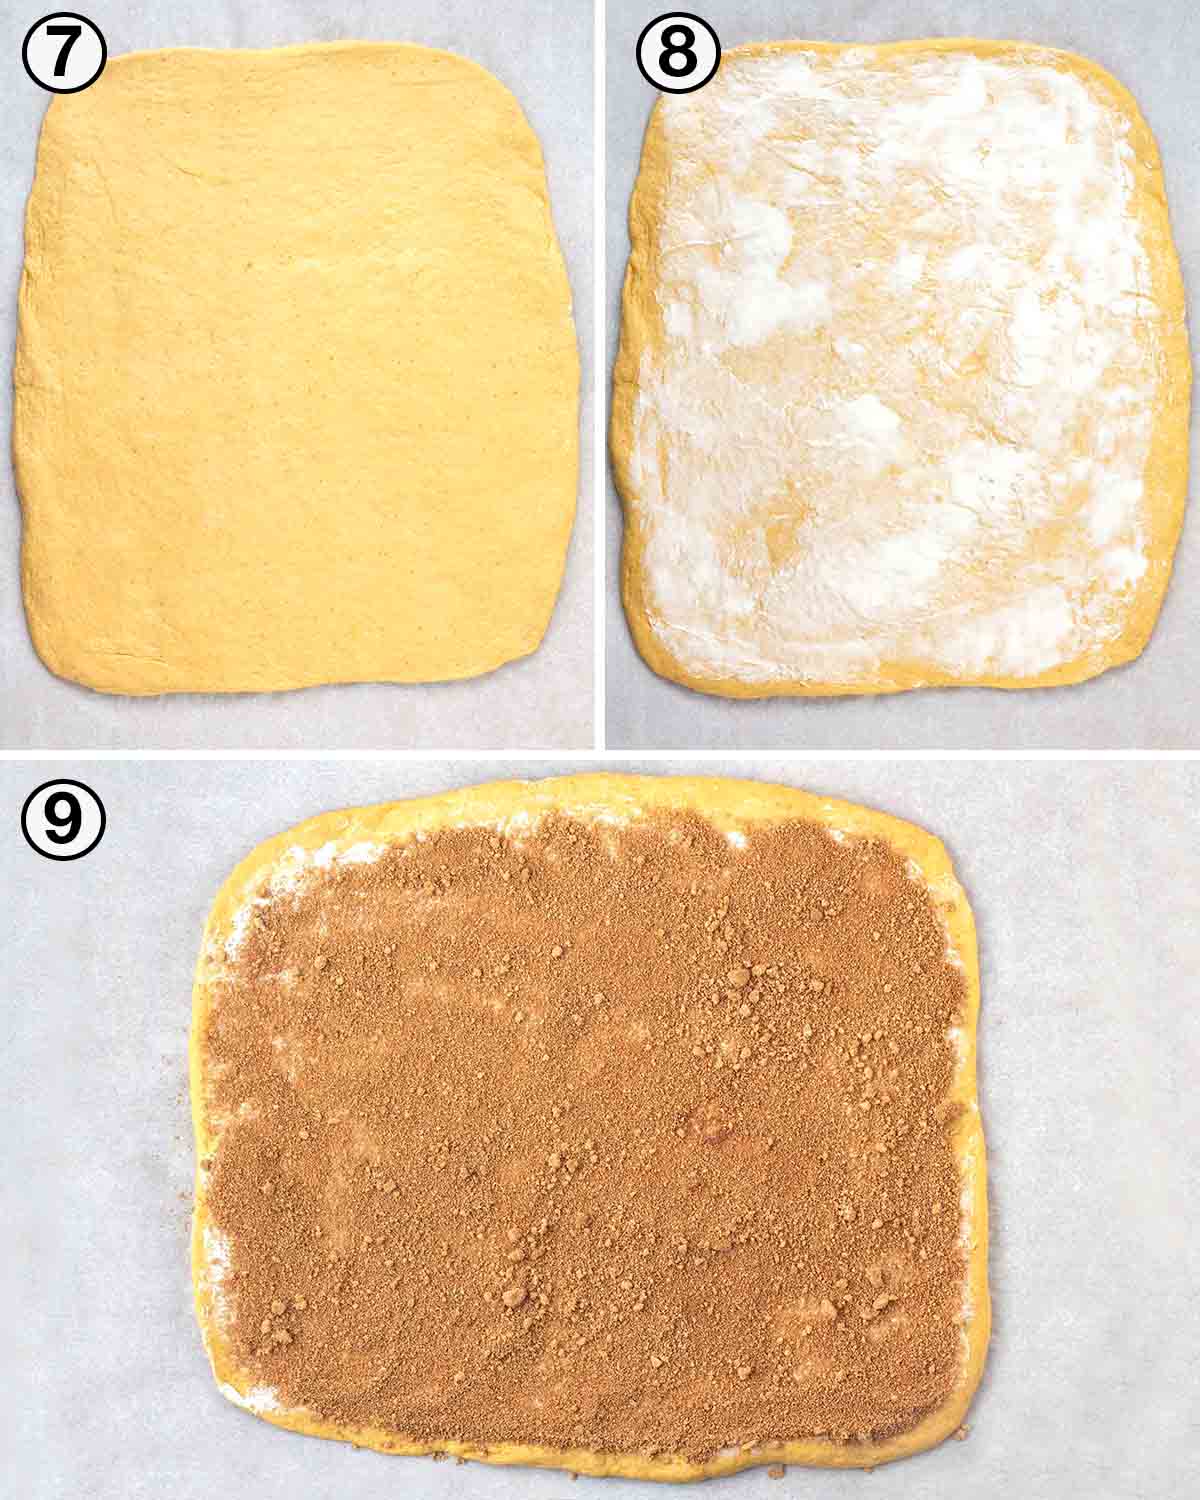 A collage of three images showing the third sequence of steps needed to make vegan pumpkin cinnamon rolls.